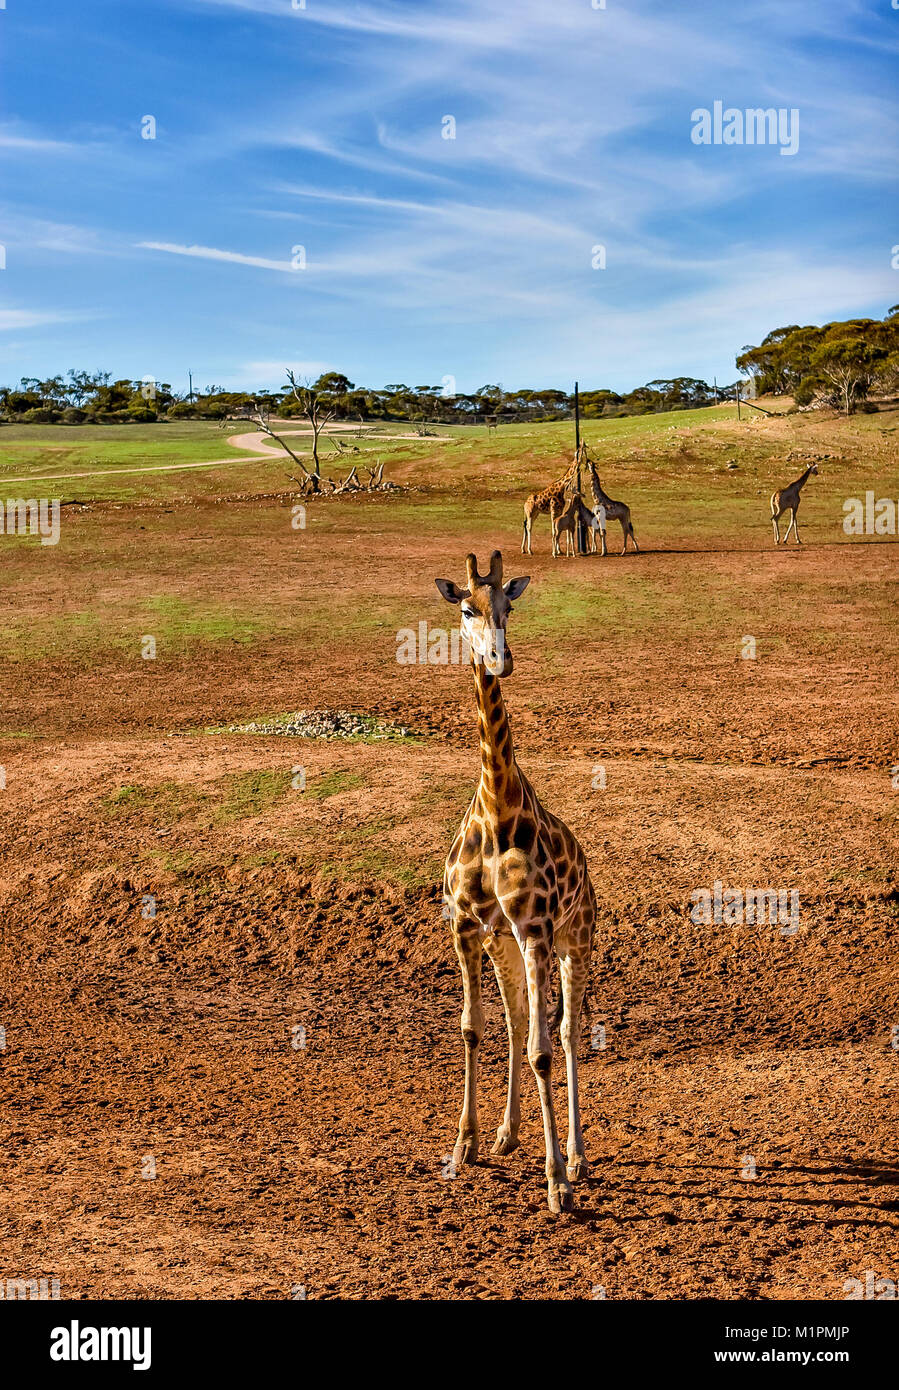 Small giraffe with other giraffes in the background Stock Photo